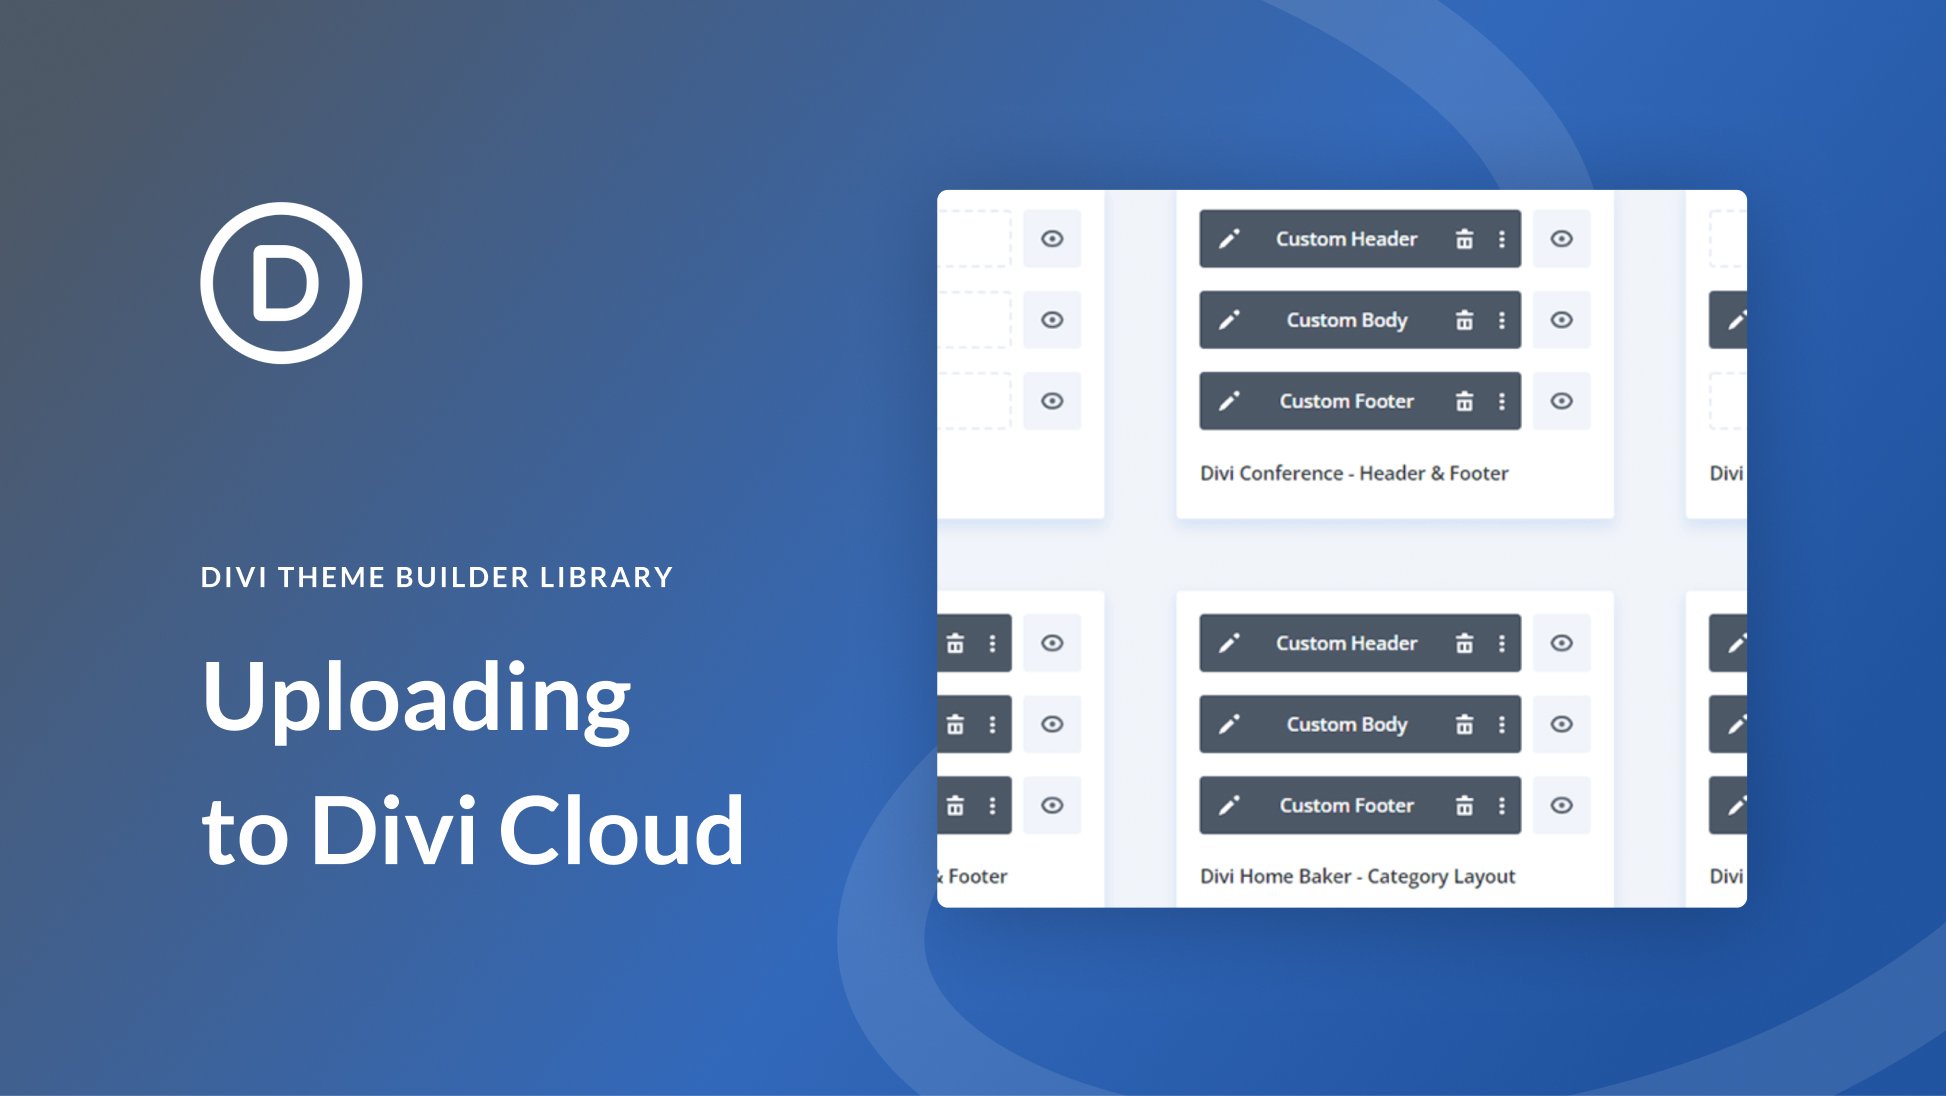 How to Upload Divi Theme Builder Templates to Your Divi Cloud